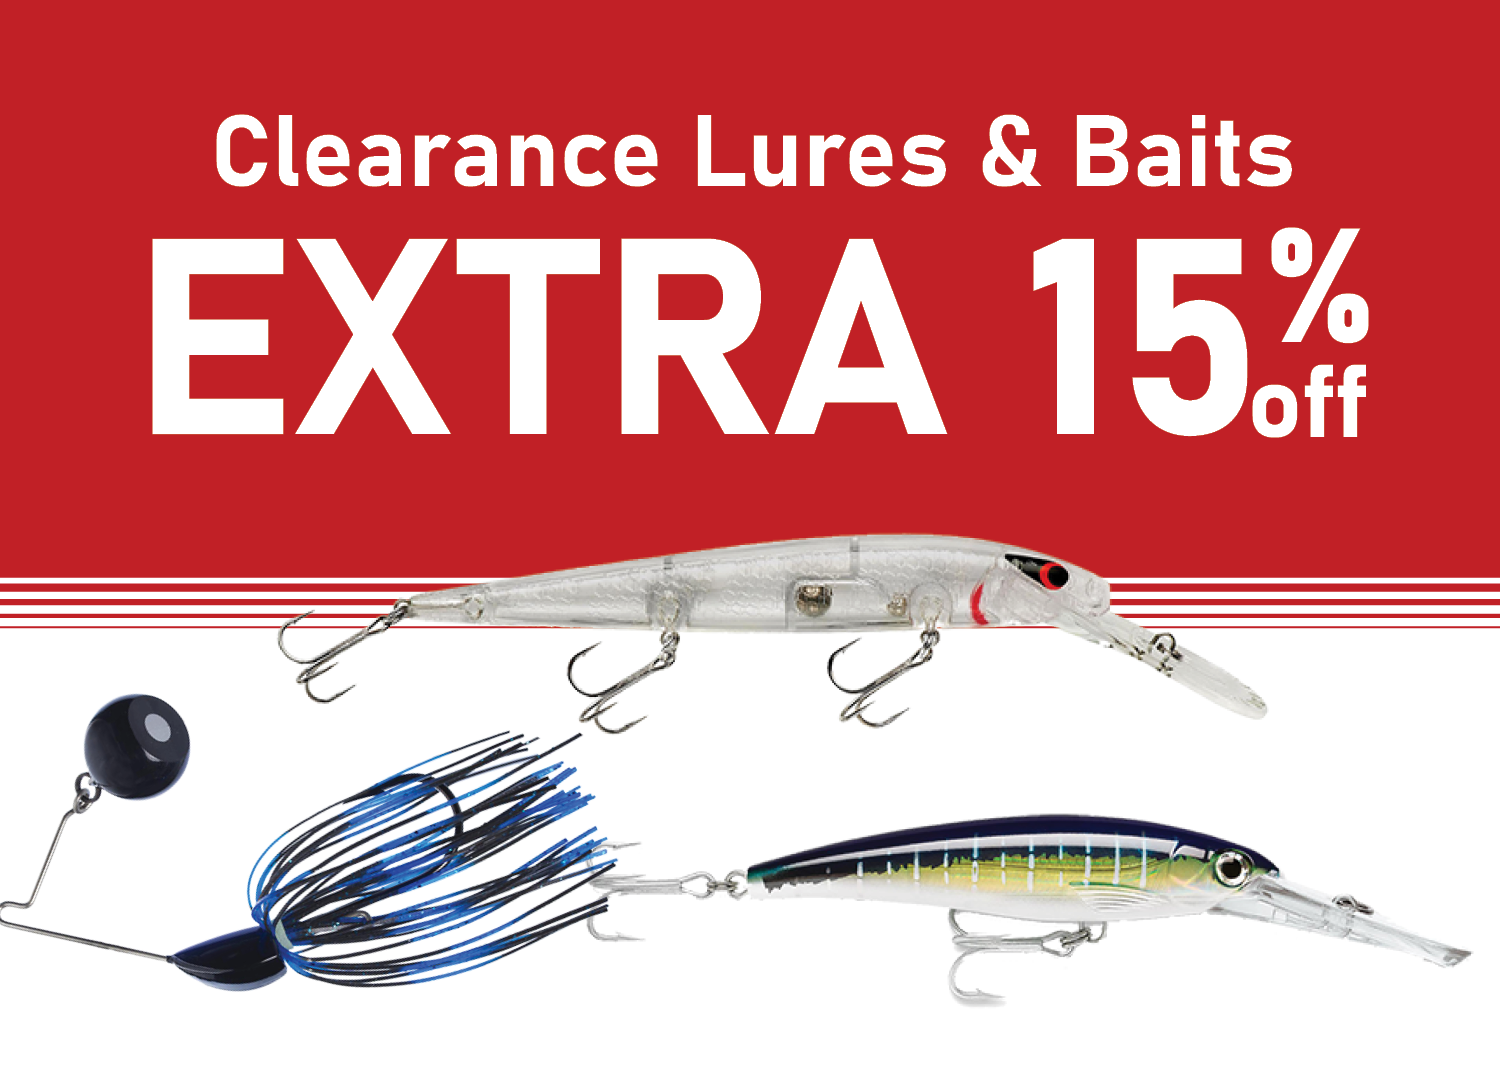 Save and EXTRA 15% on Clearance Lures & Bait